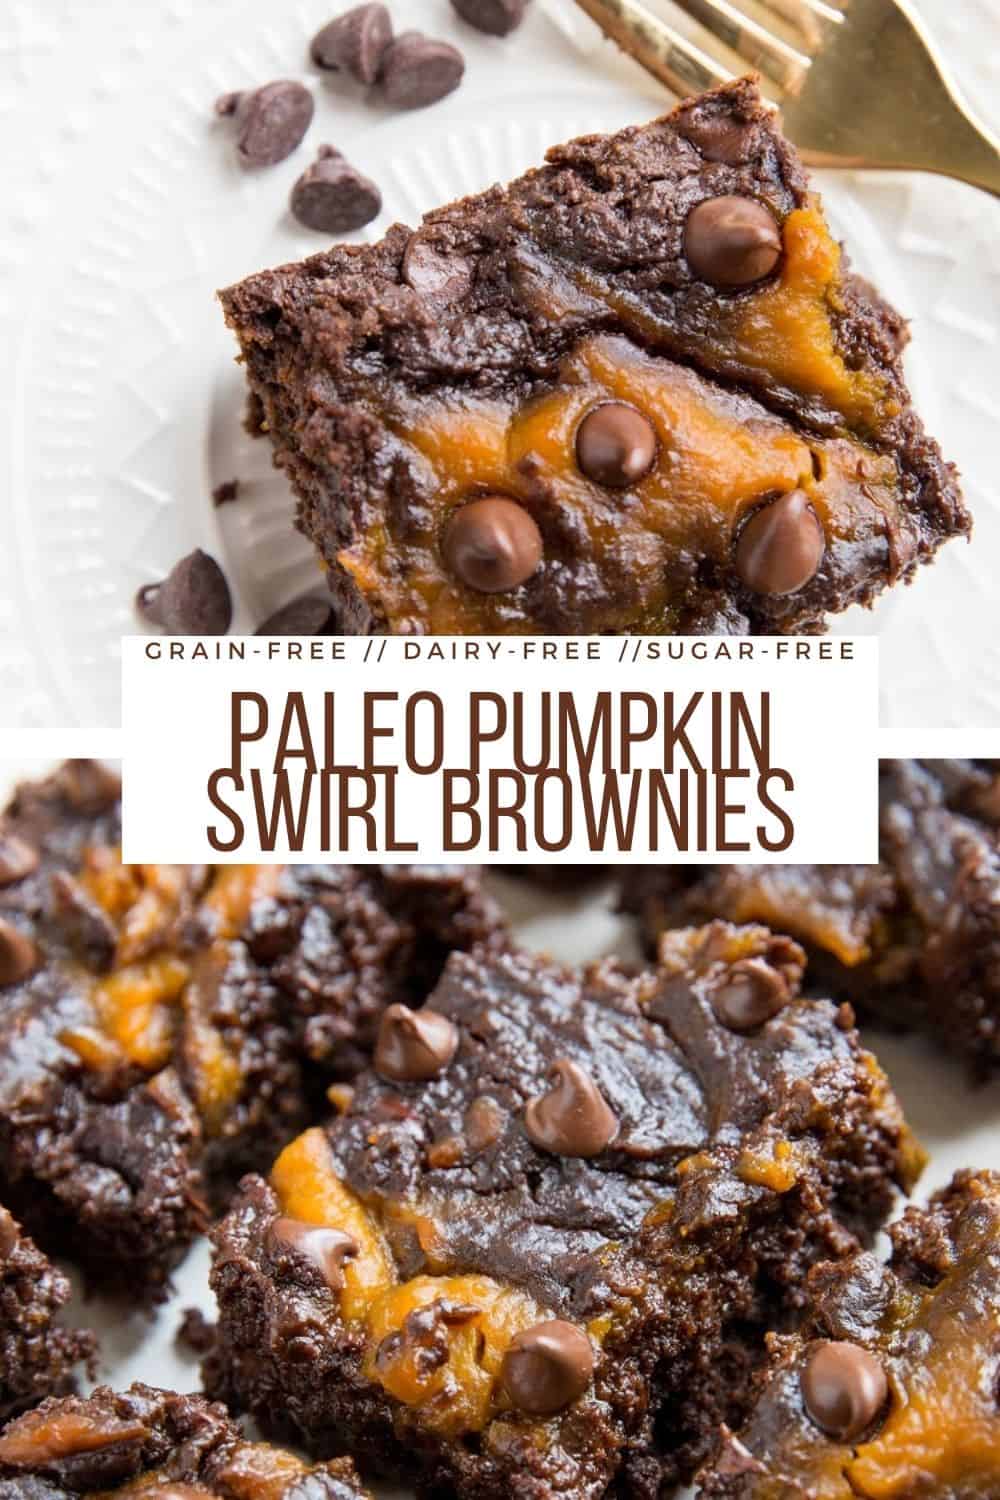 Paleo Pumpkin Swirl Brownies (with a Gluten-Free Option) - The Roasted Root